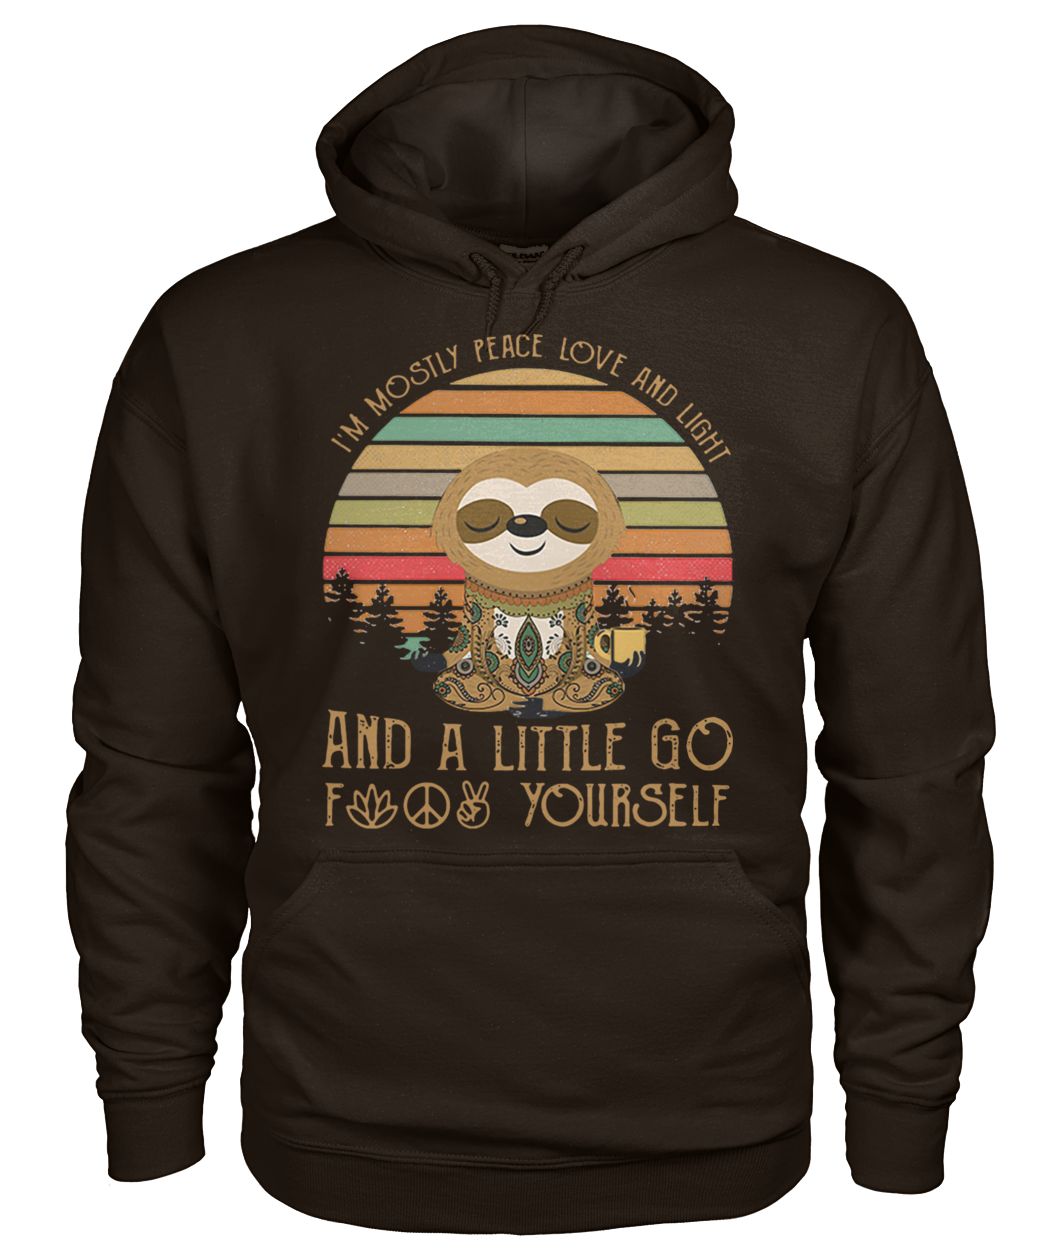 Sloth I’m mostly peace love and light and a little go fuck yourself vintage gildan hoodie